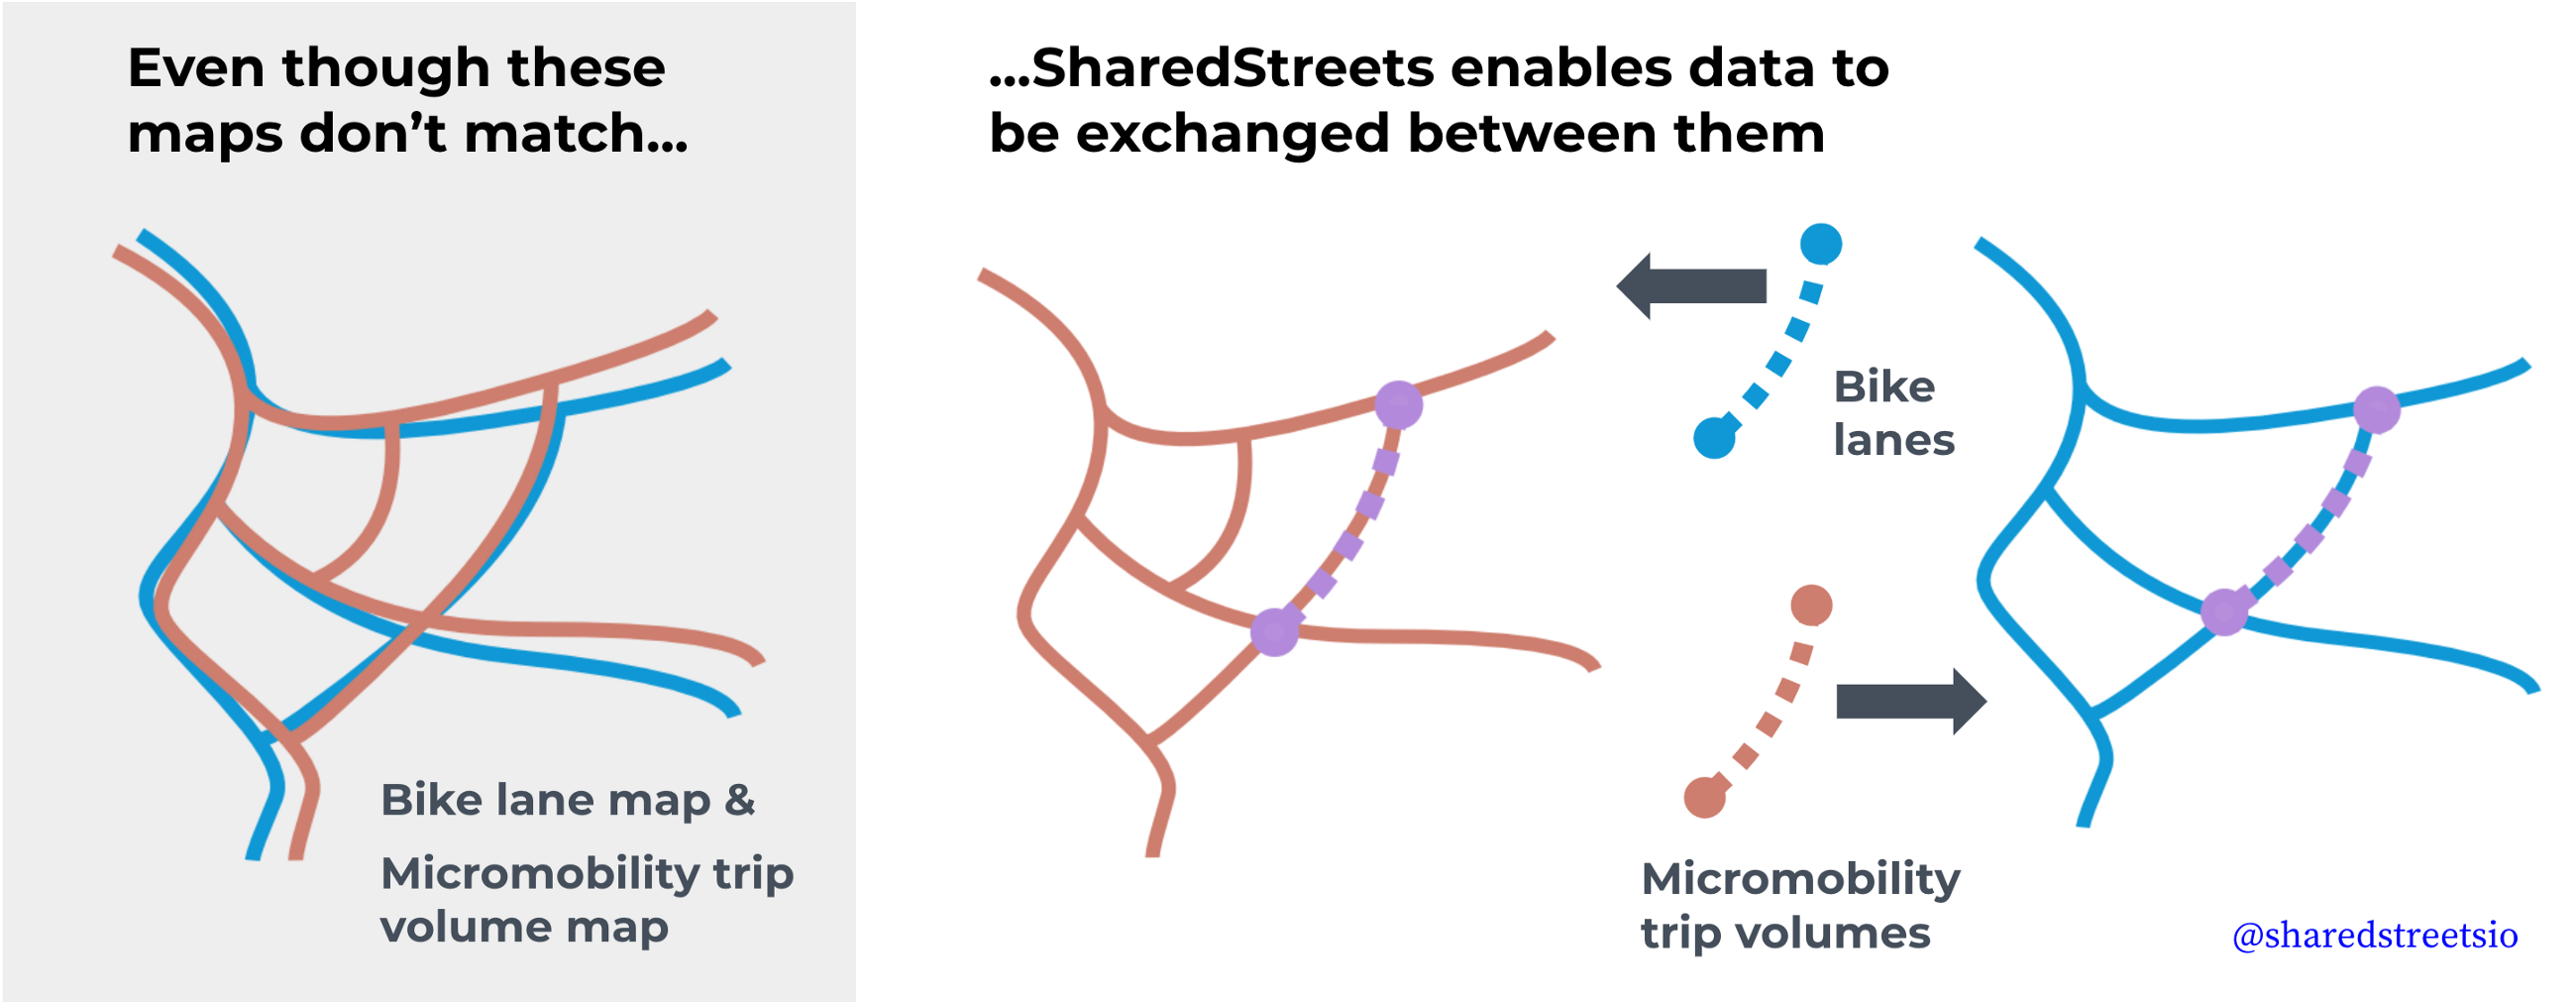 map-matching with SharedStreets